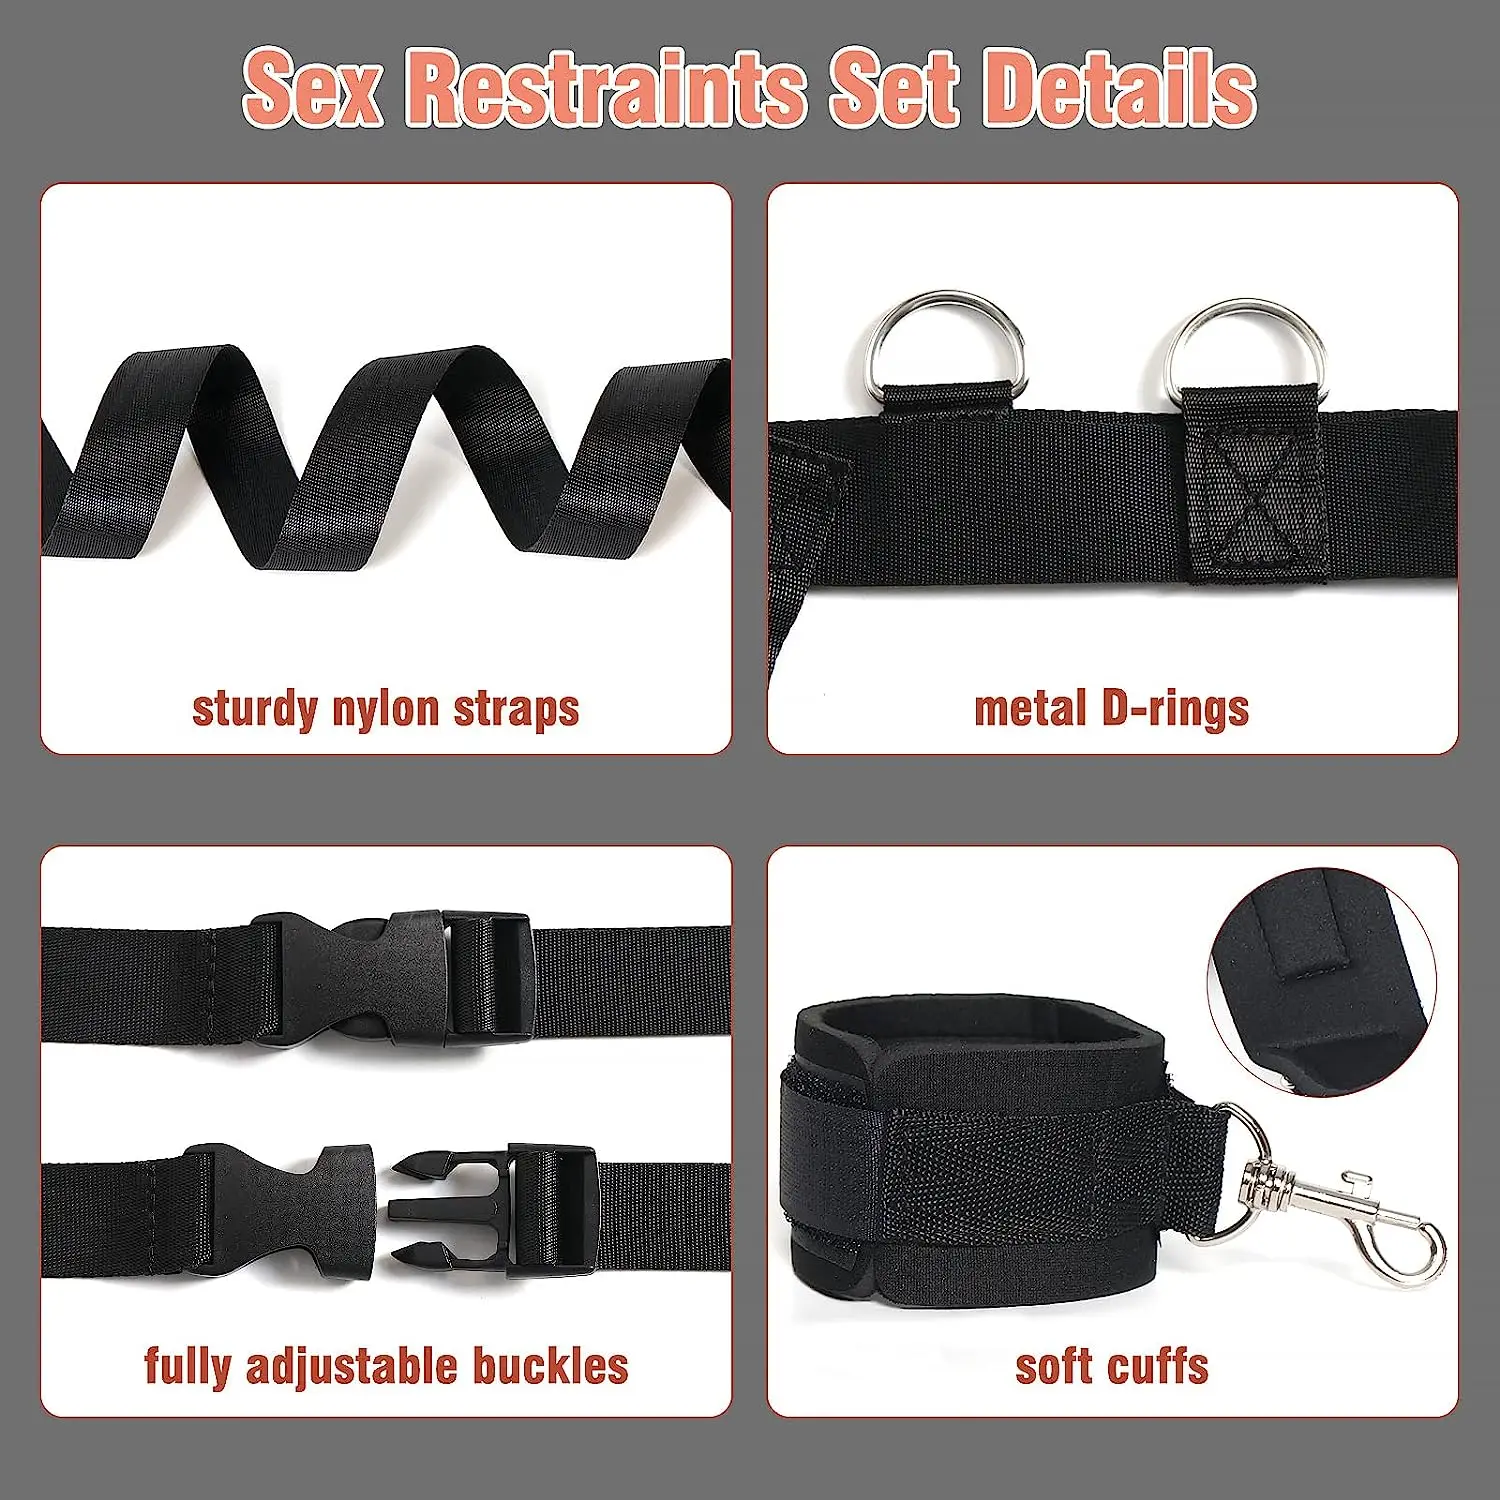 Bed BDSM Set Sex Toy Handcuffs for Couple Woman Adult Kit Supplies BDSM Restraints Bed Bondage Rope Sexual Handcuffs Sexy Game